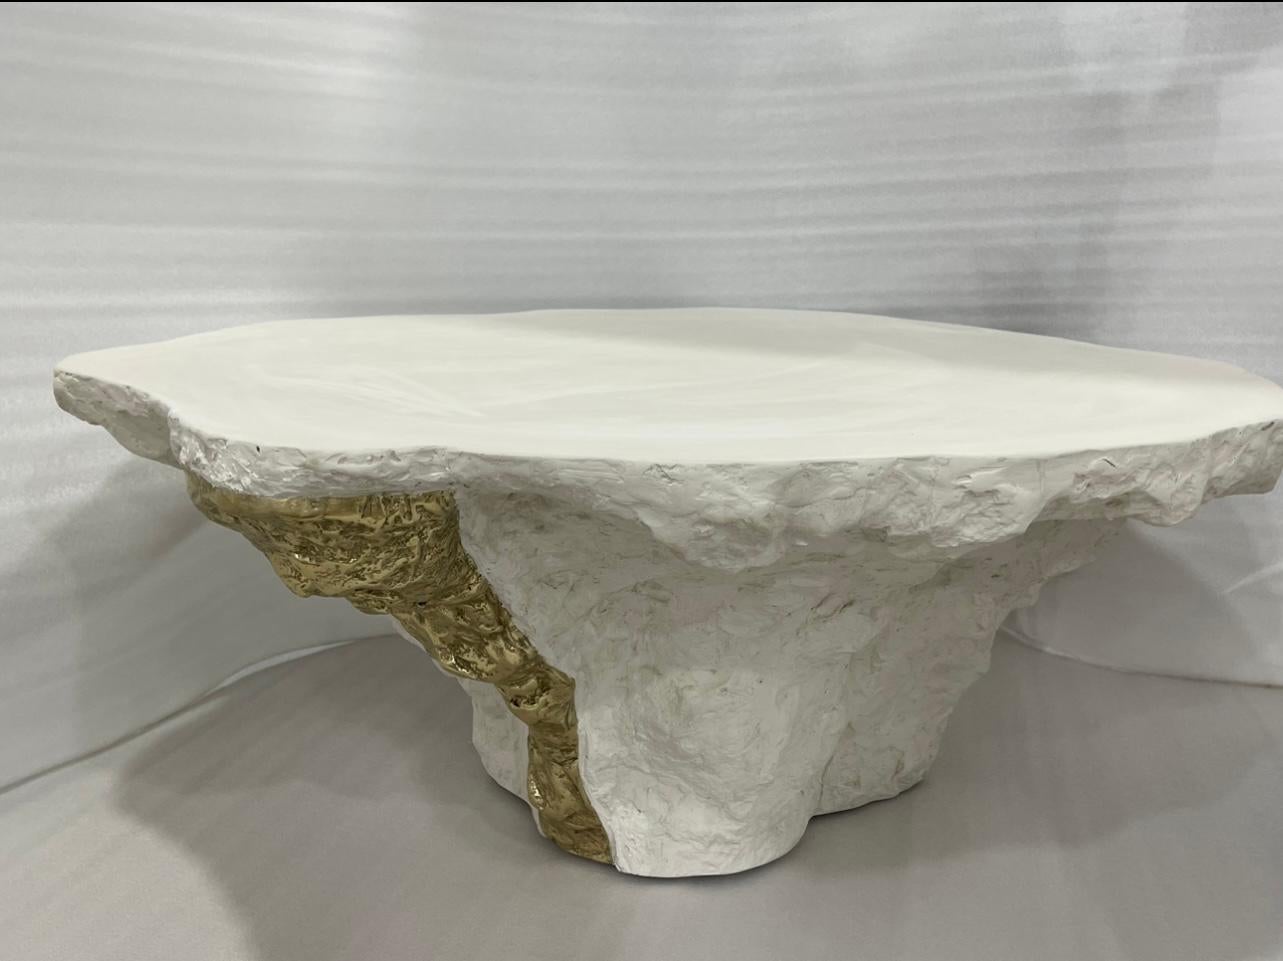 Crafted with artistic flair, the sculptural Roccia Gelerio center table by RIZO embodies contemporary design with its unique form, texture and materiality. Carved from mixed-mediums, its strong yet organic shape evokes a sense of natural beauty and